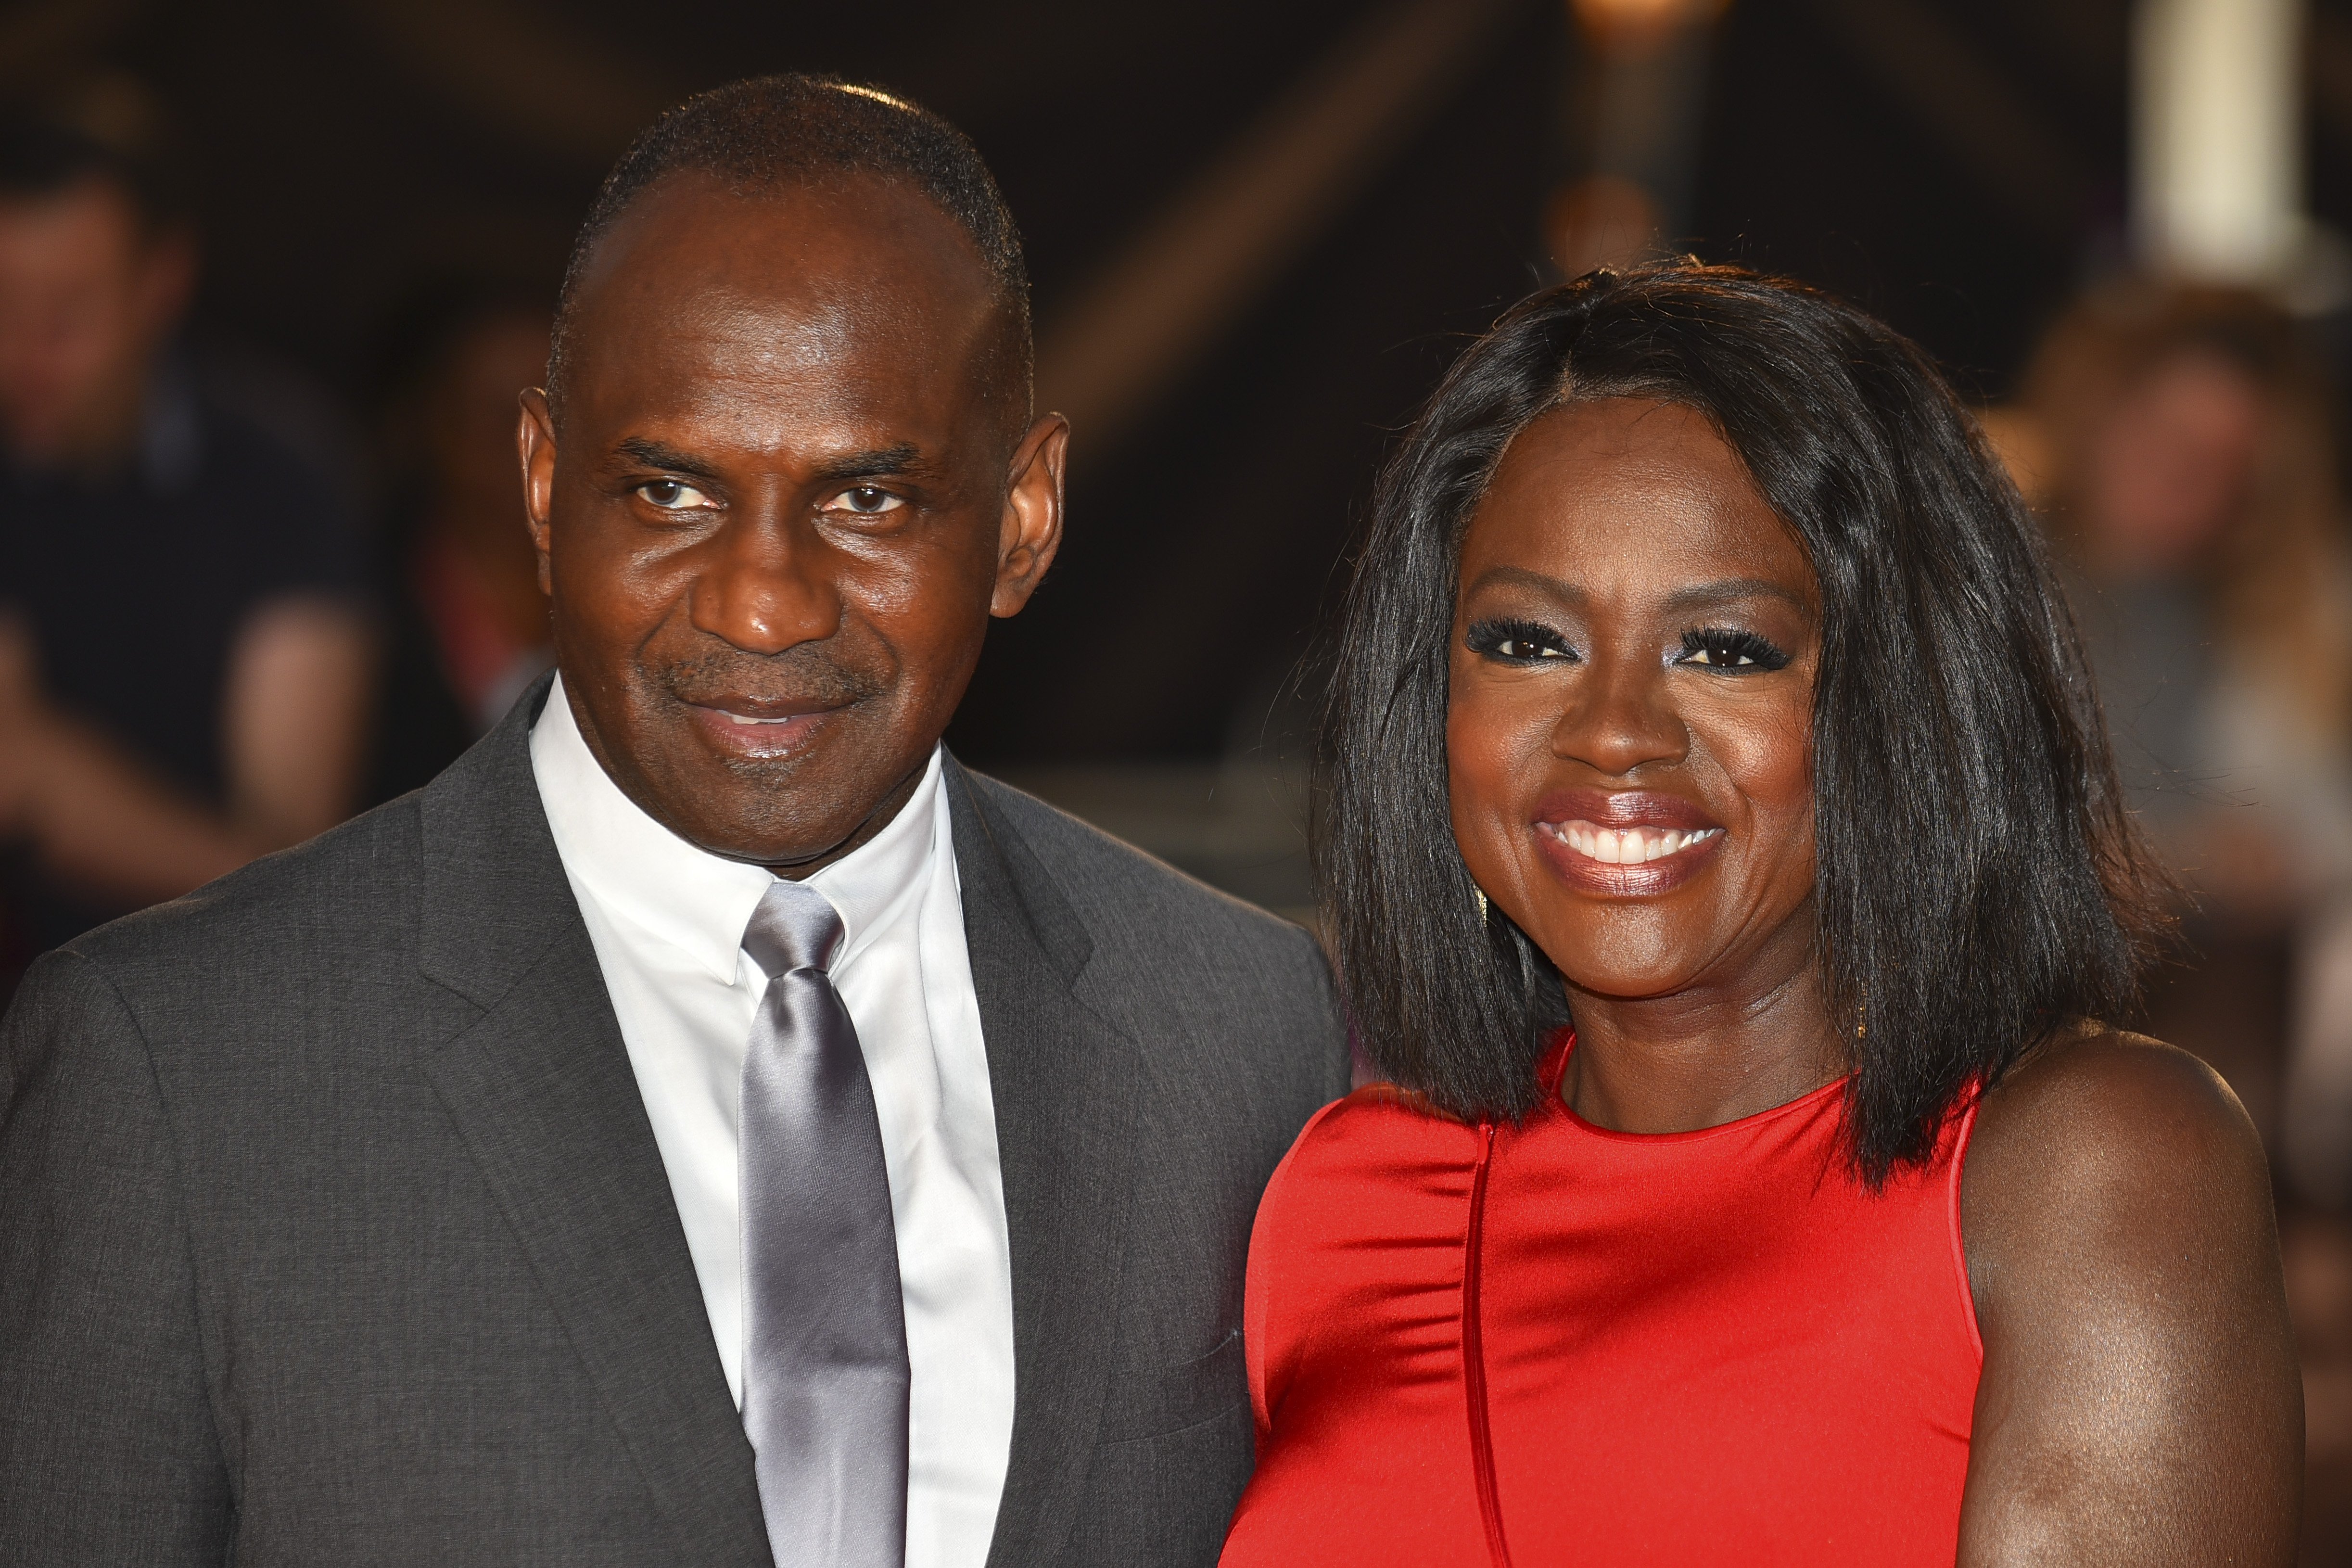 Julius Tennon and Viola Davis attend the European Premiere of 'Widows' on October 10, 2018, in London, England. | Source: Getty Images